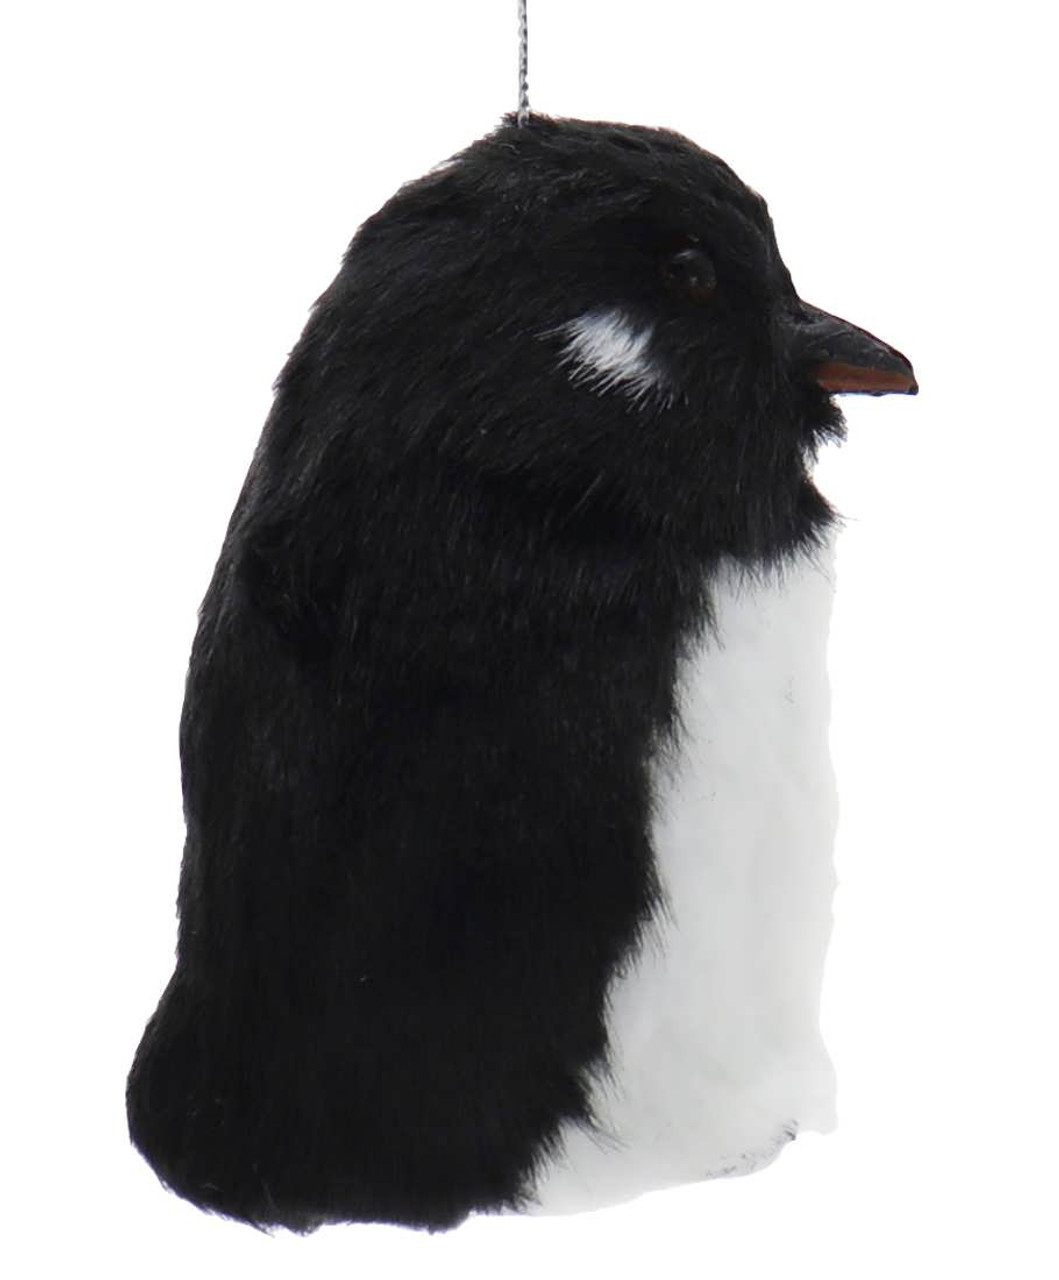 Large Baby Penguin Christmas Tree Topper by Amica